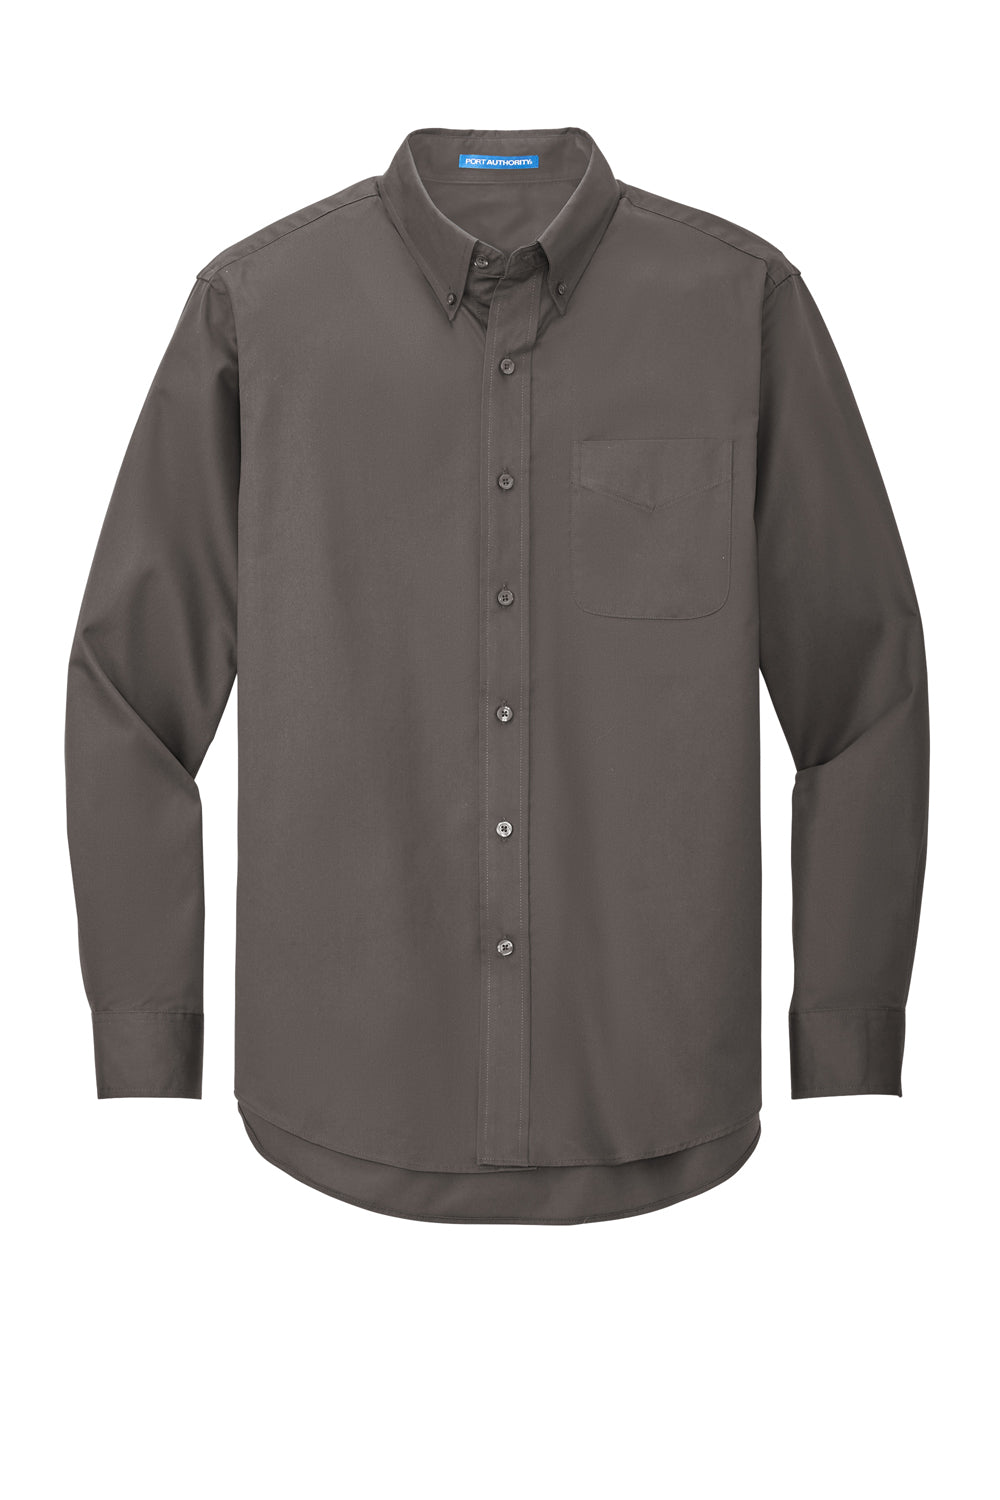 Port Authority S608/TLS608/S608ES Mens Easy Care Wrinkle Resistant Long Sleeve Button Down Shirt w/ Pocket Bark Brown Flat Front